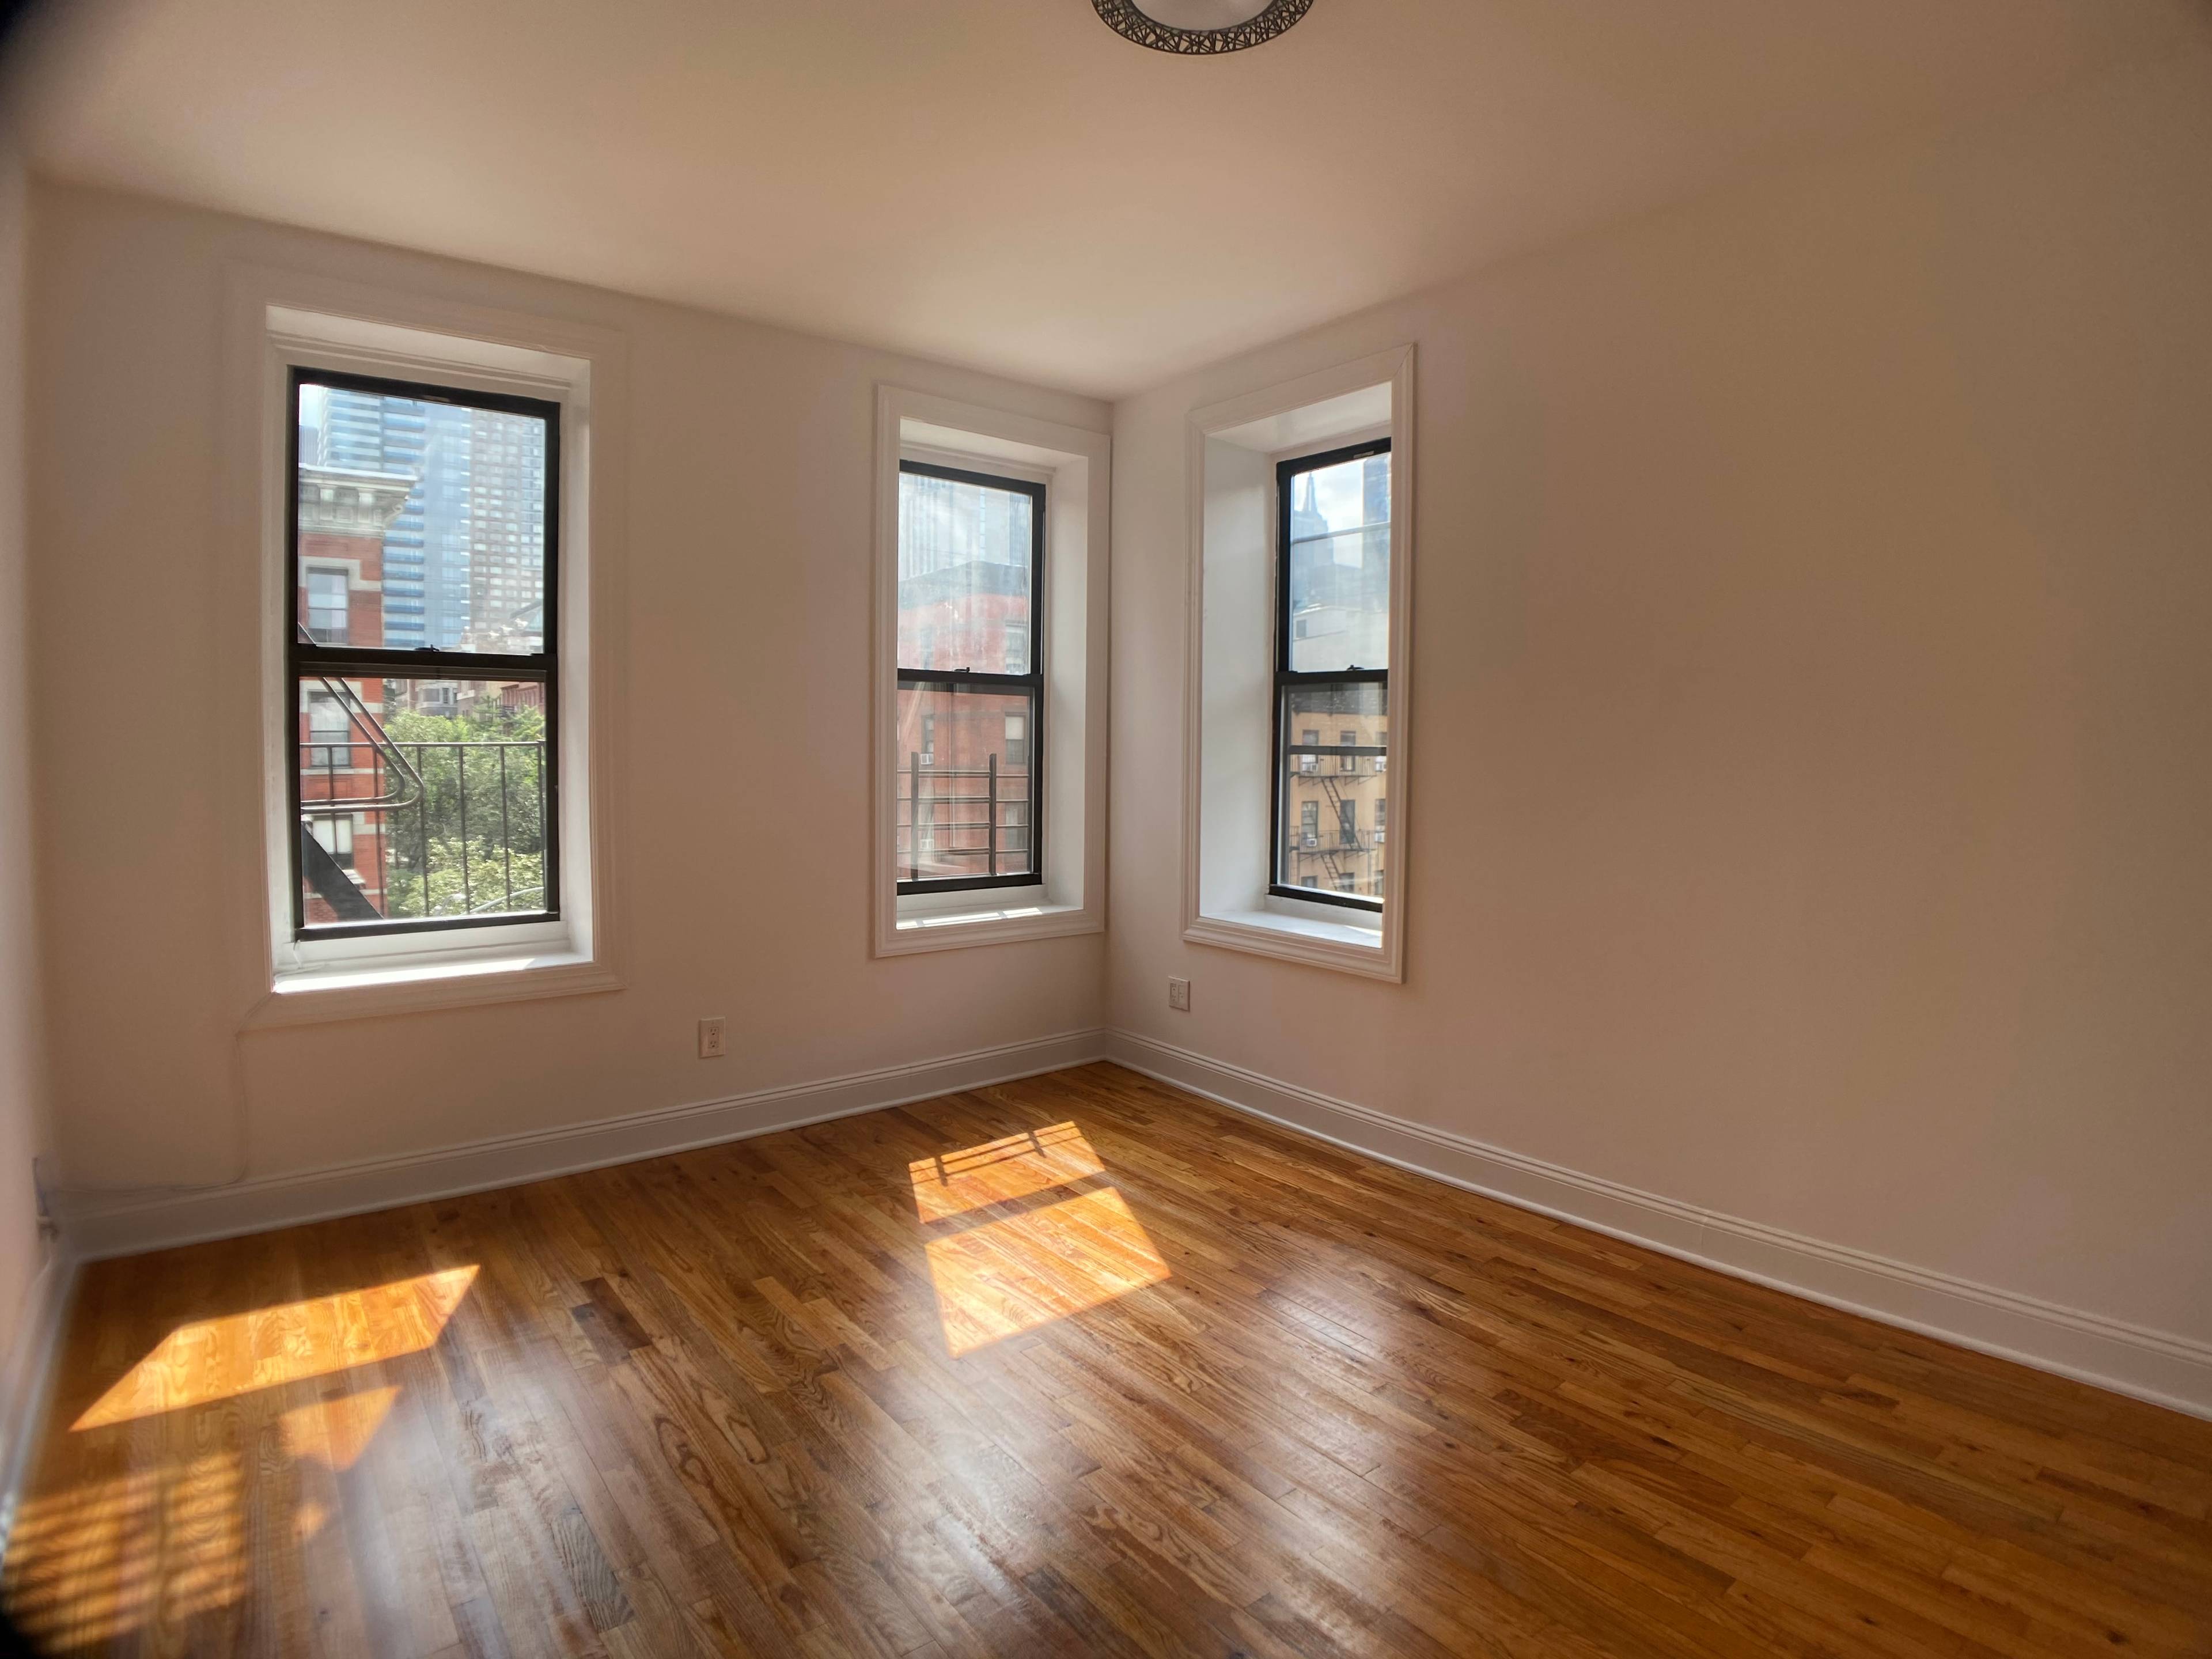 BEAUTIFUL MIDTOWN WEST HELL'S KITCHEN 2 BEDROOM with PRIVATE WORKSPACE Separate third room South facing, corner unit with tons of natural light !